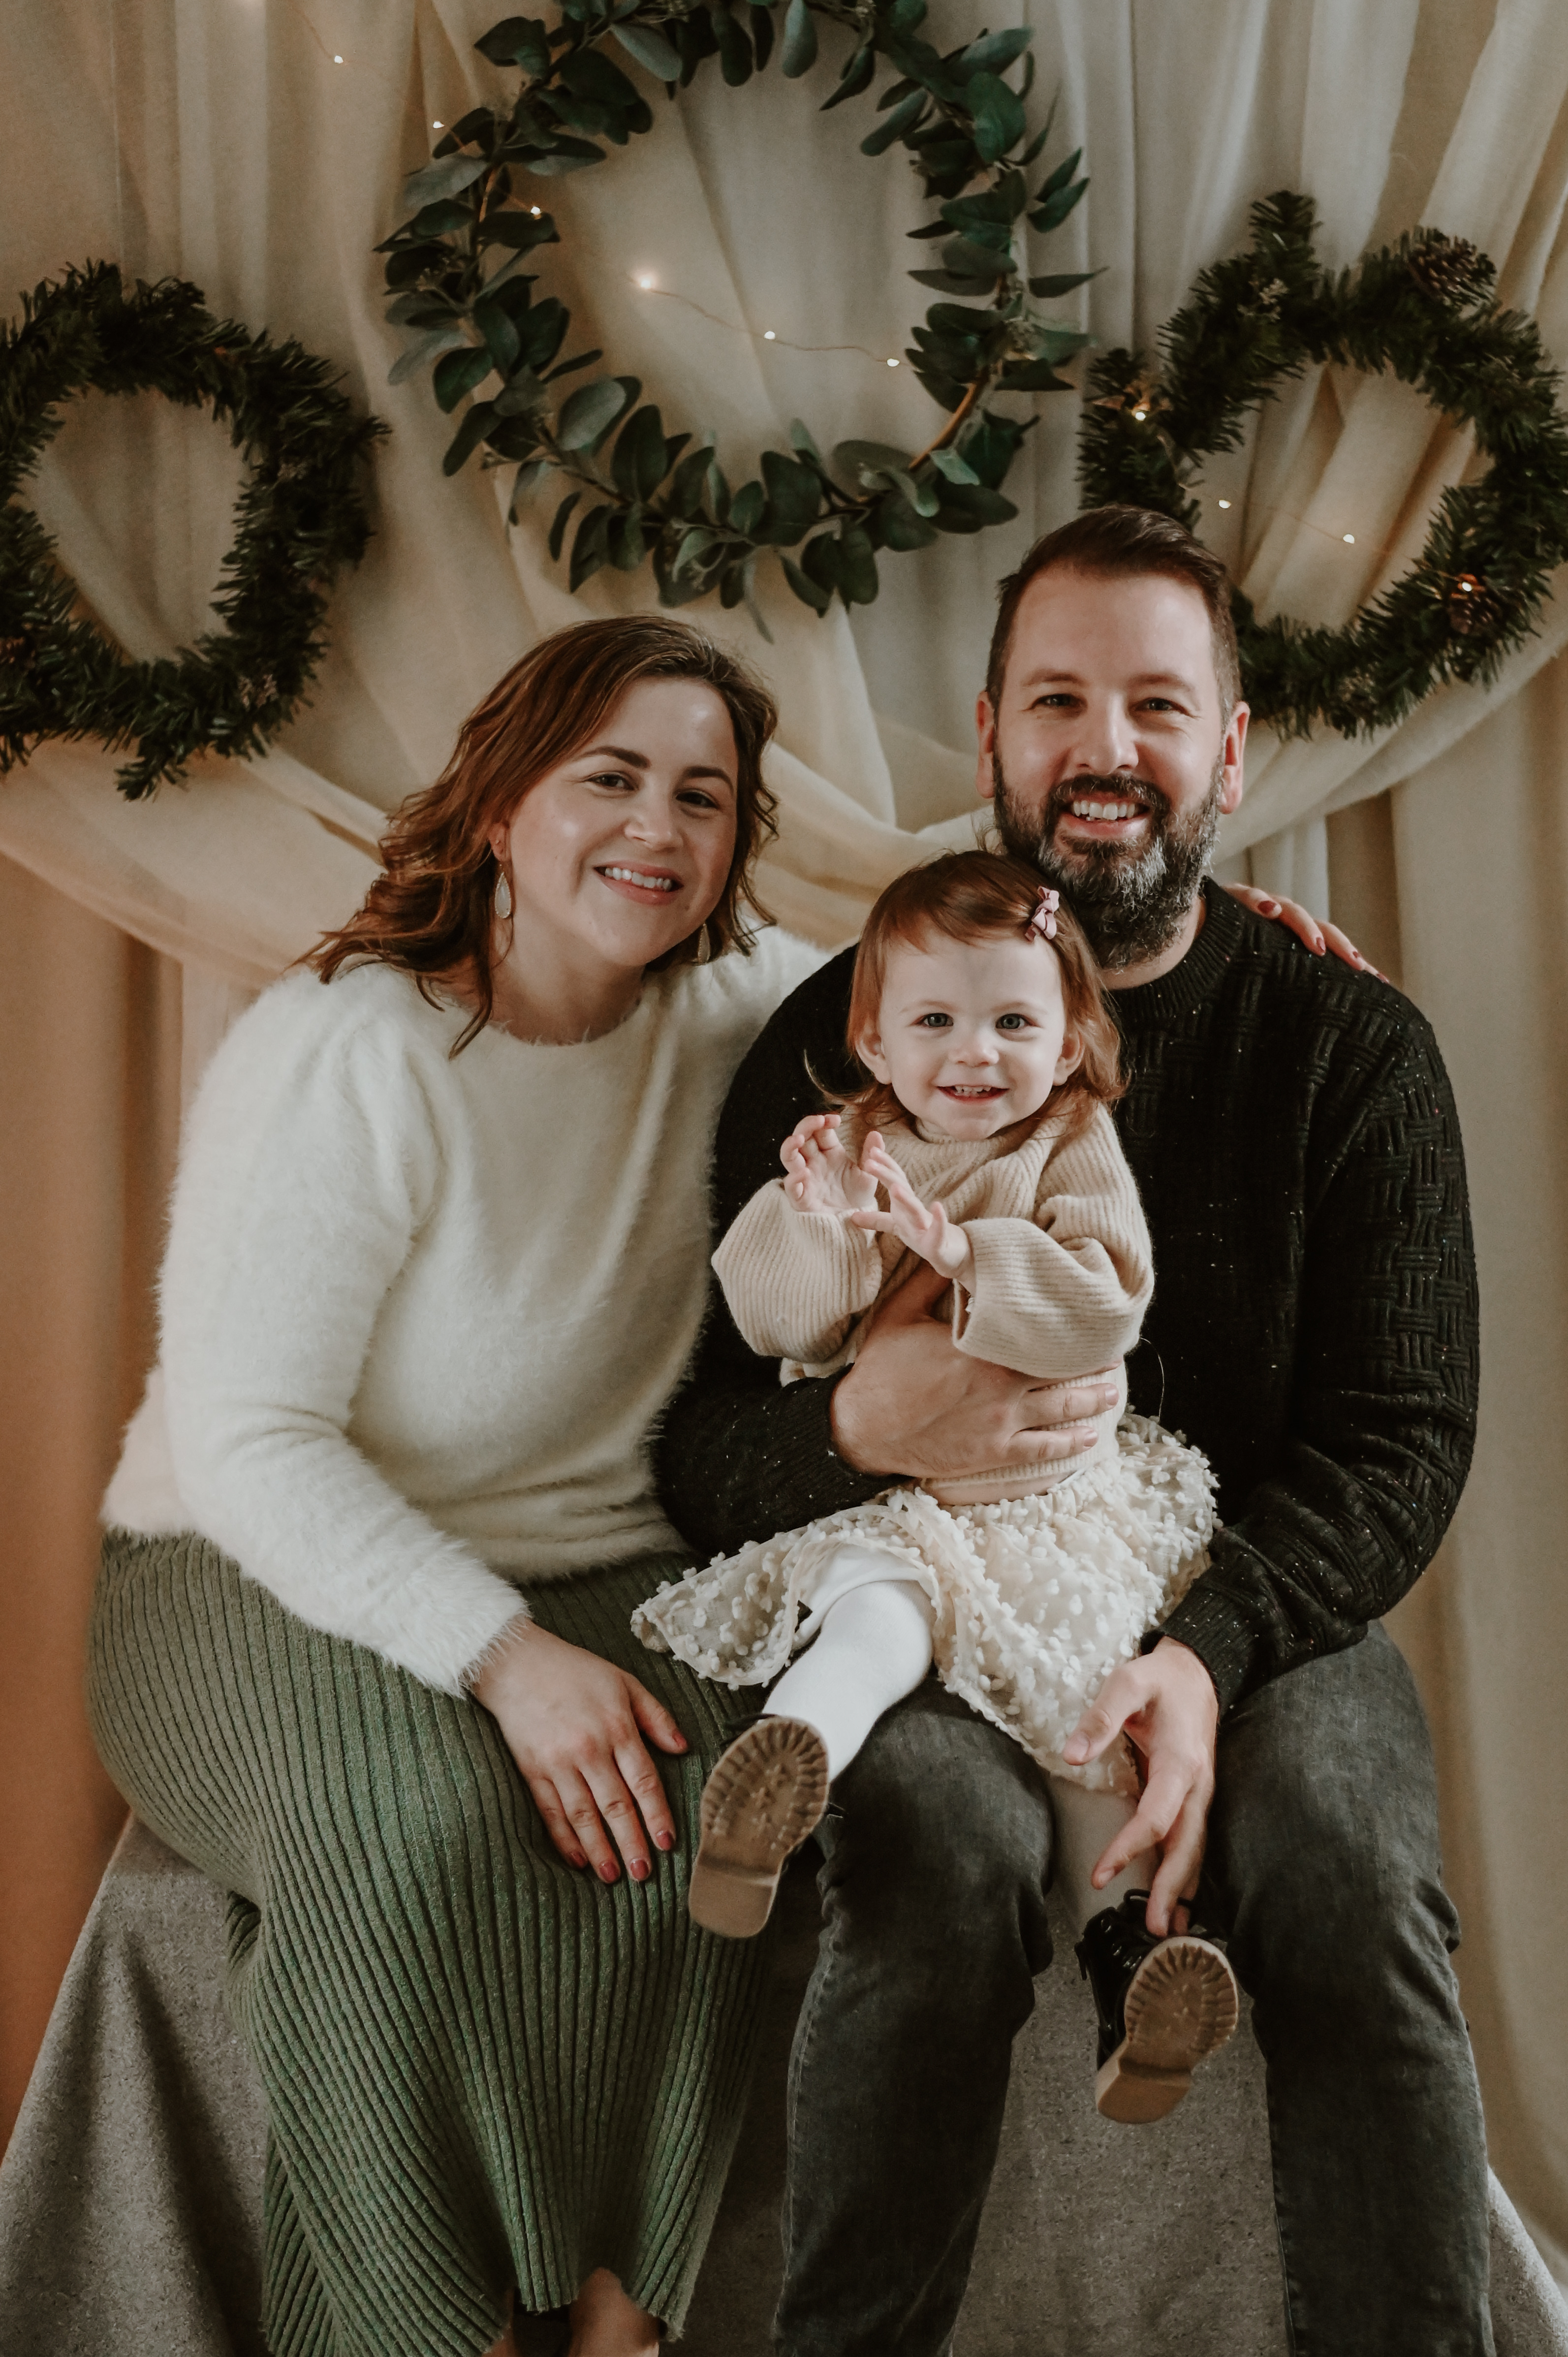 Family holiday photoshoot with toddler in the middle